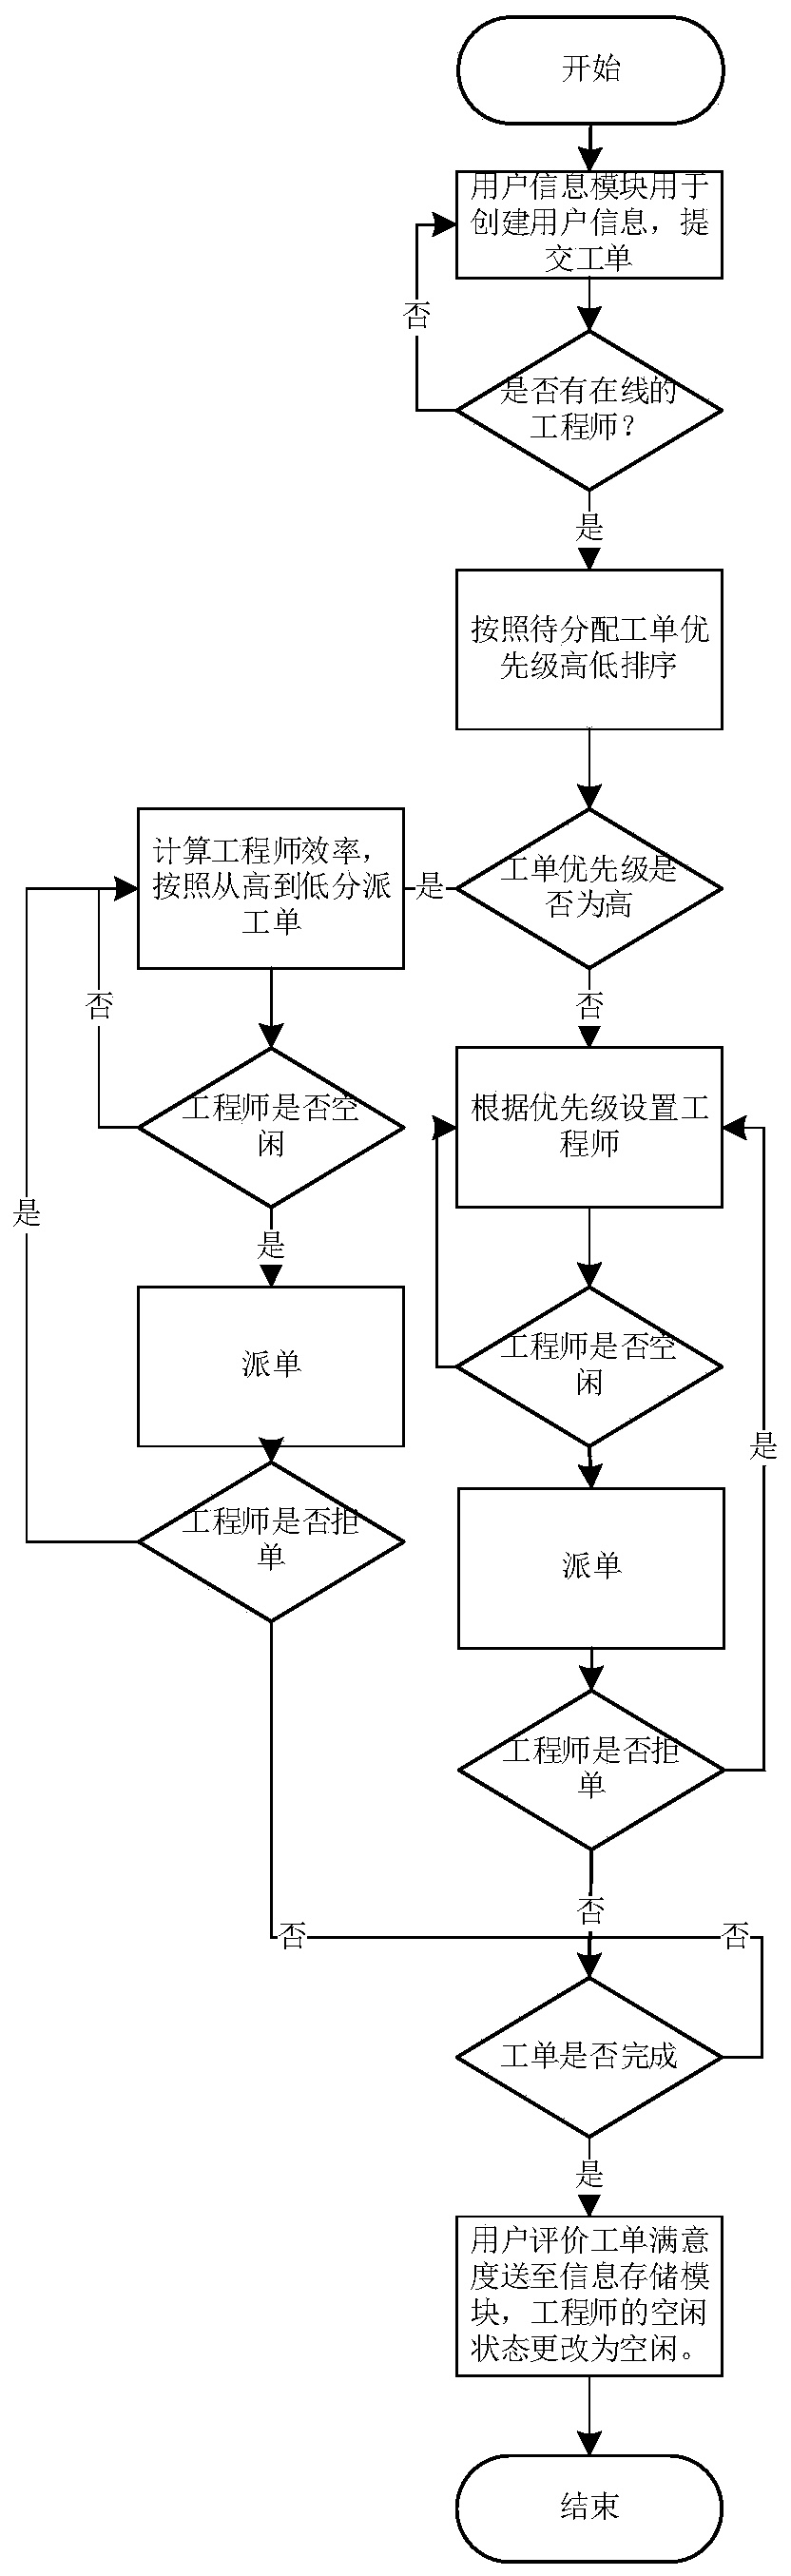 Method and system for automatically distributing work order